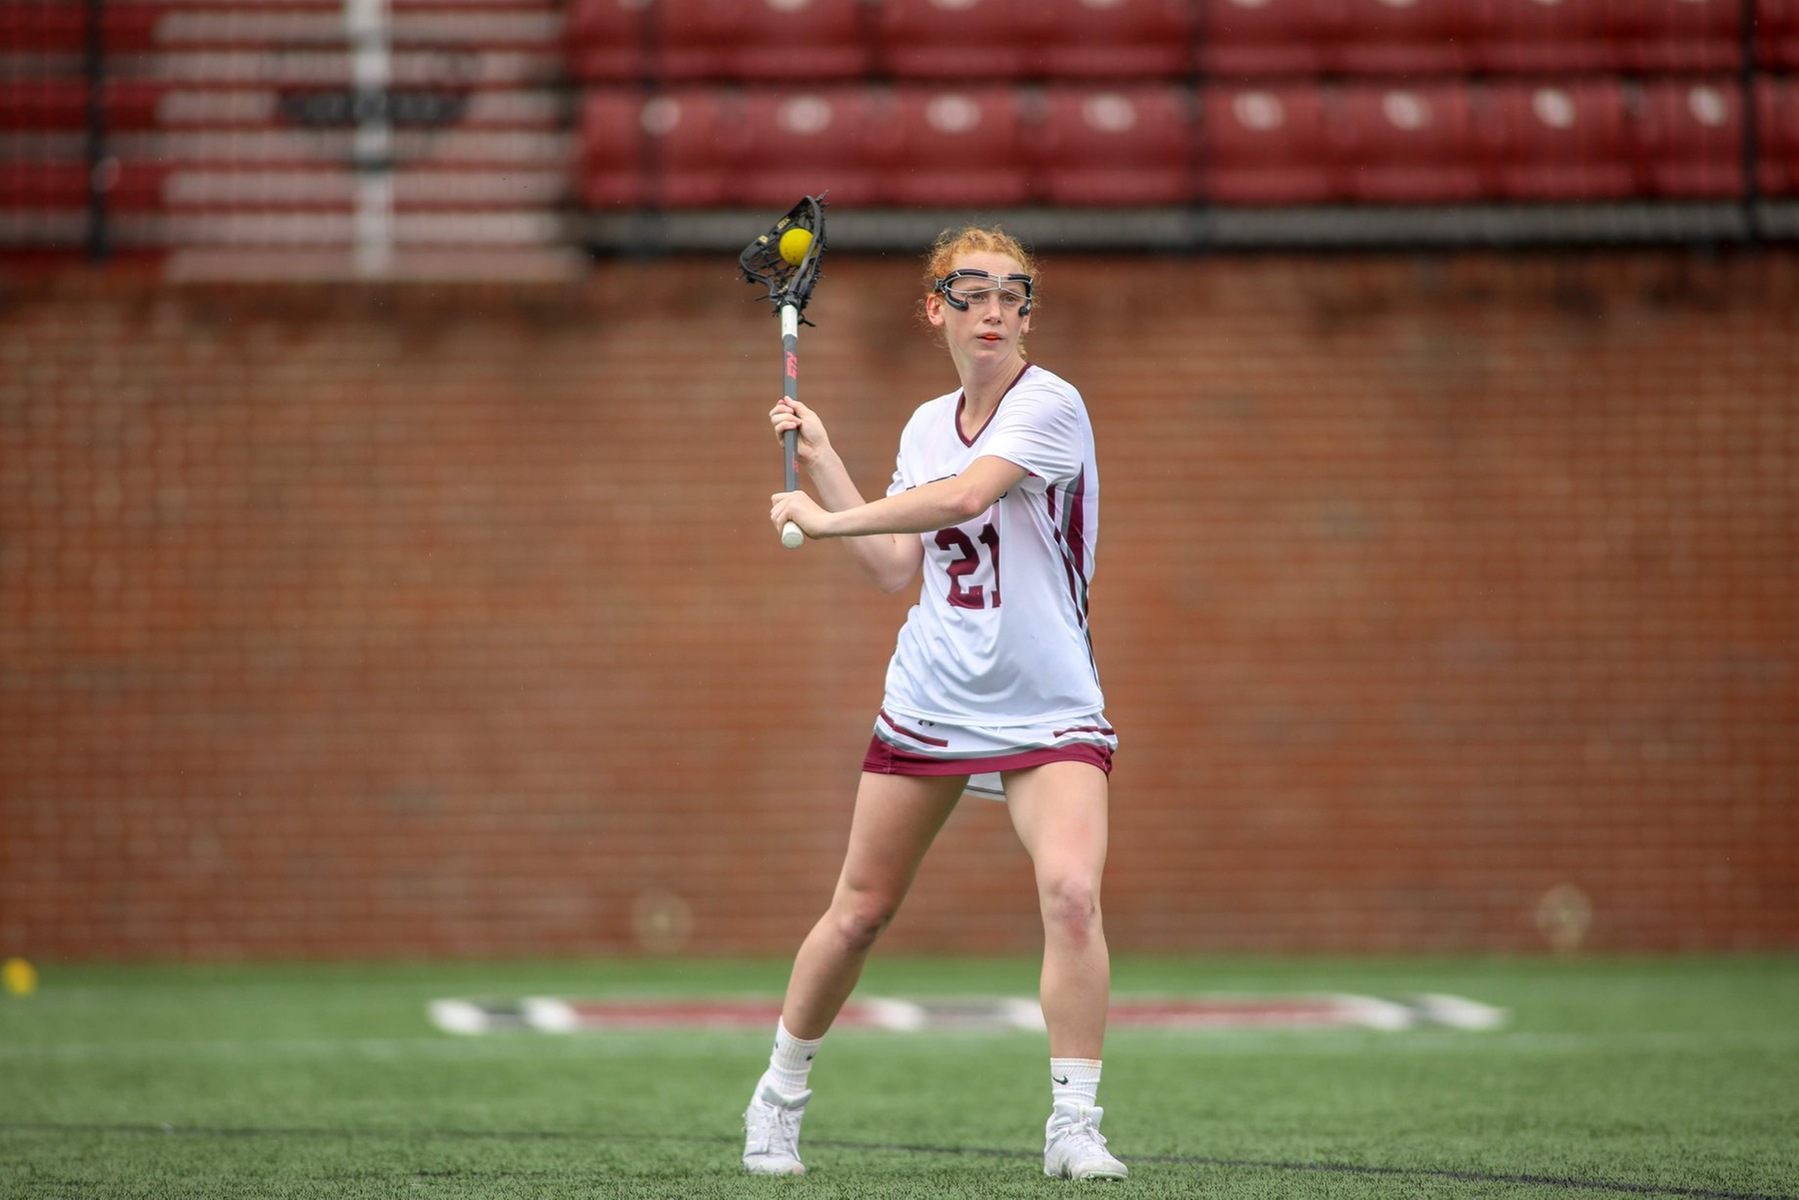 Fourteen first-half goals sent Roanoke to a 19-5 victory over Sewanee Monday afternoon.